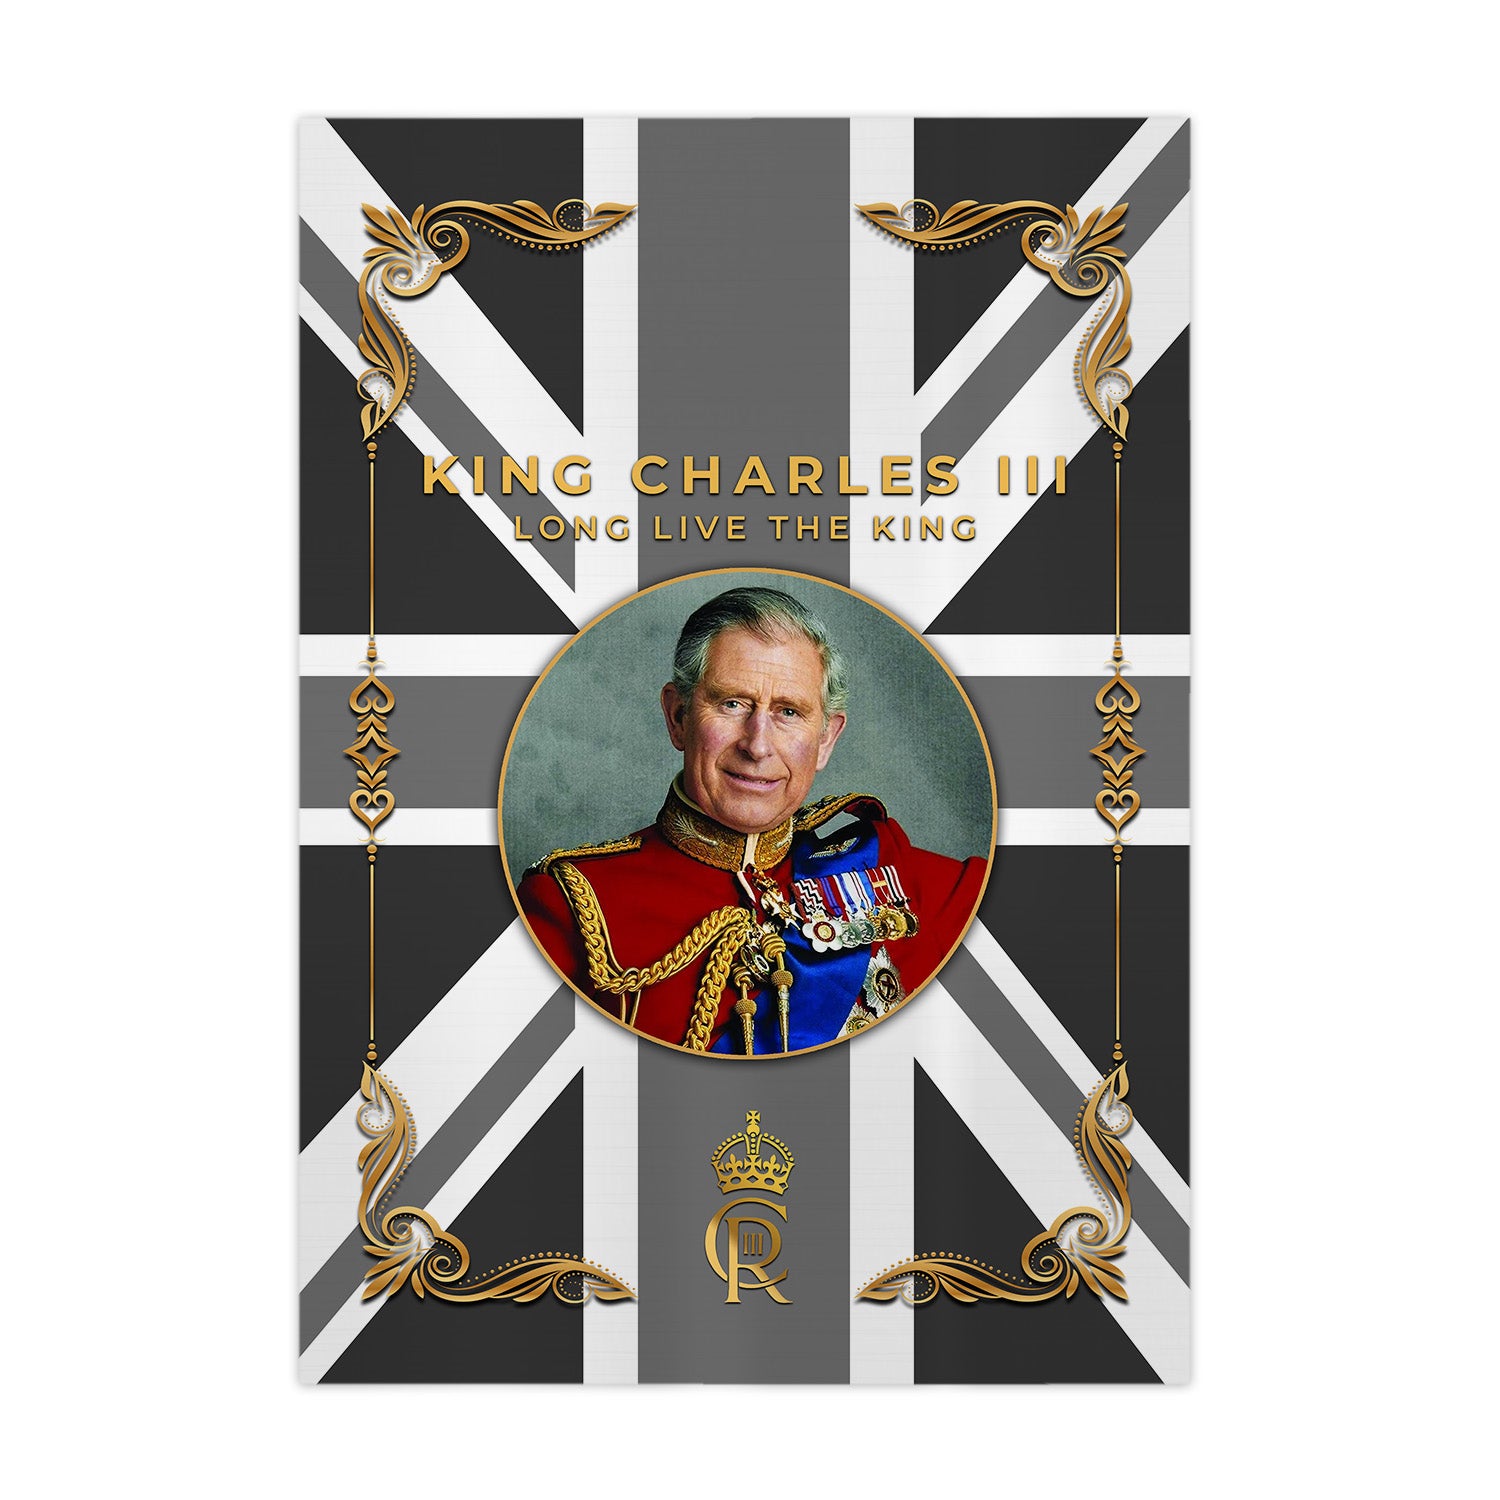 King Charles Coronation - B&W Flag - A4 Metal Sign Plaque - Frame Options Available KING i L T 